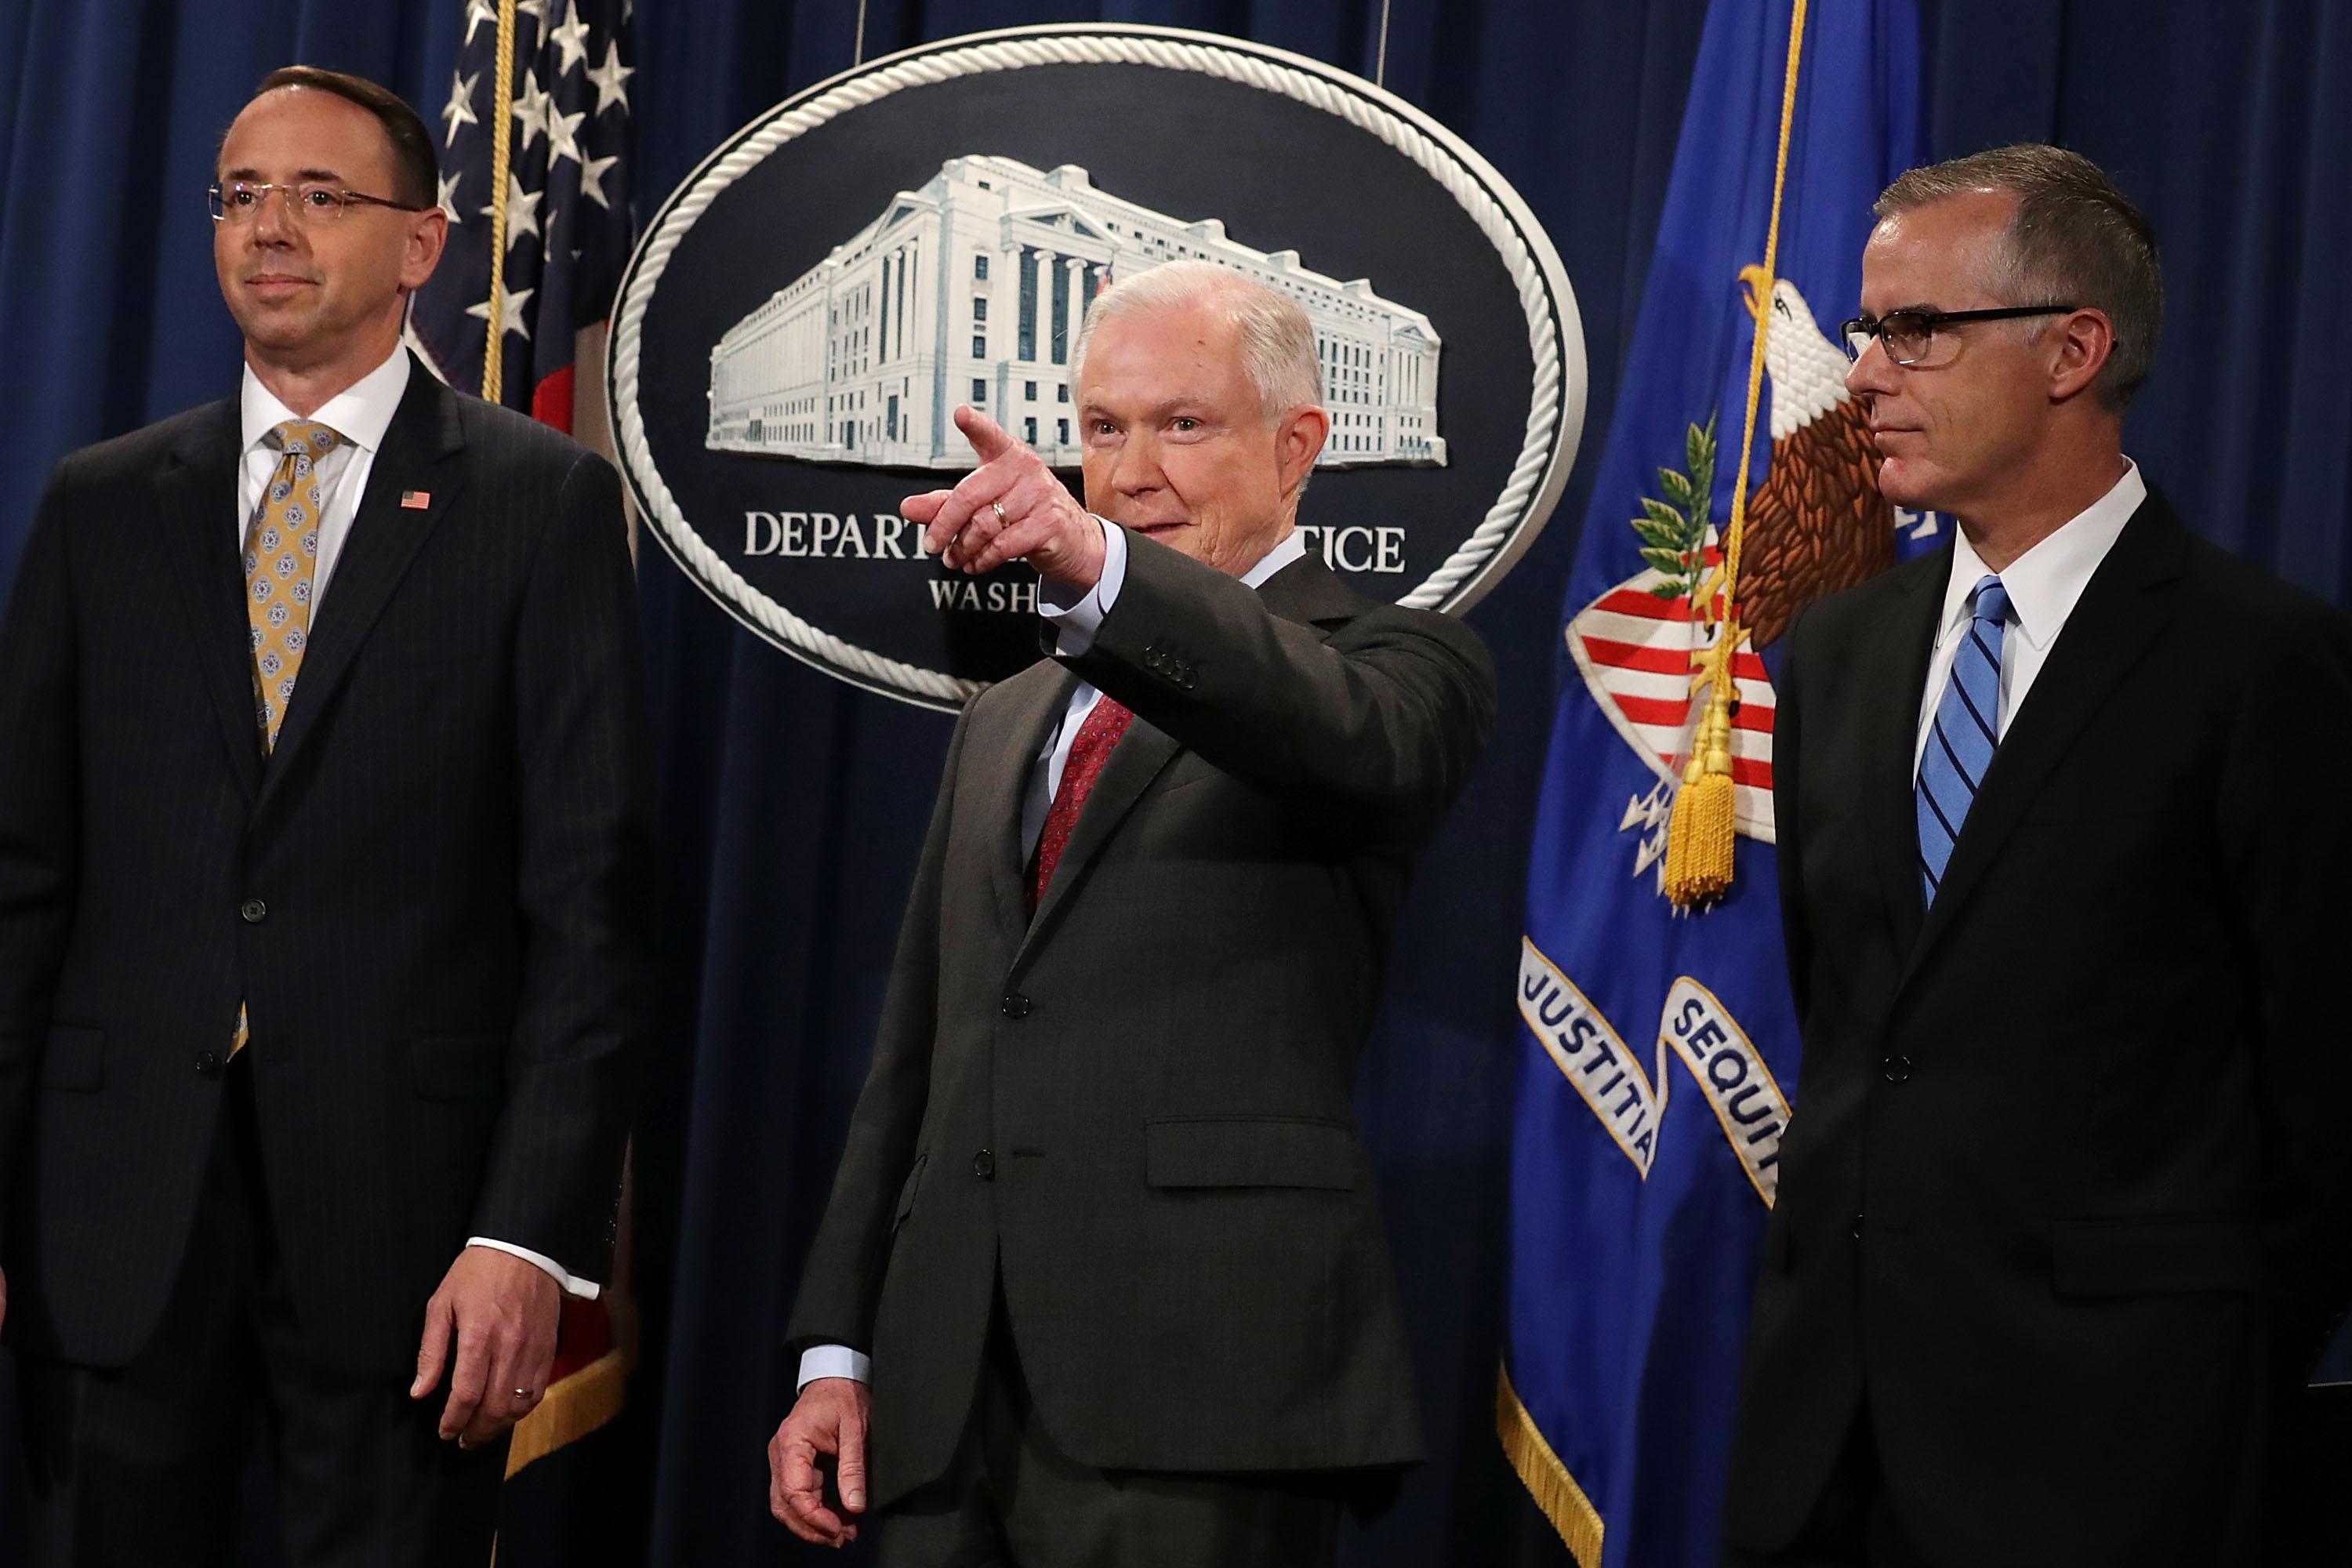 Rod Rosenstein, Jeff Sessions, and Andrew McCabe stand in front of a DOJ backdrop. Sessions points toward the assembled crowd.